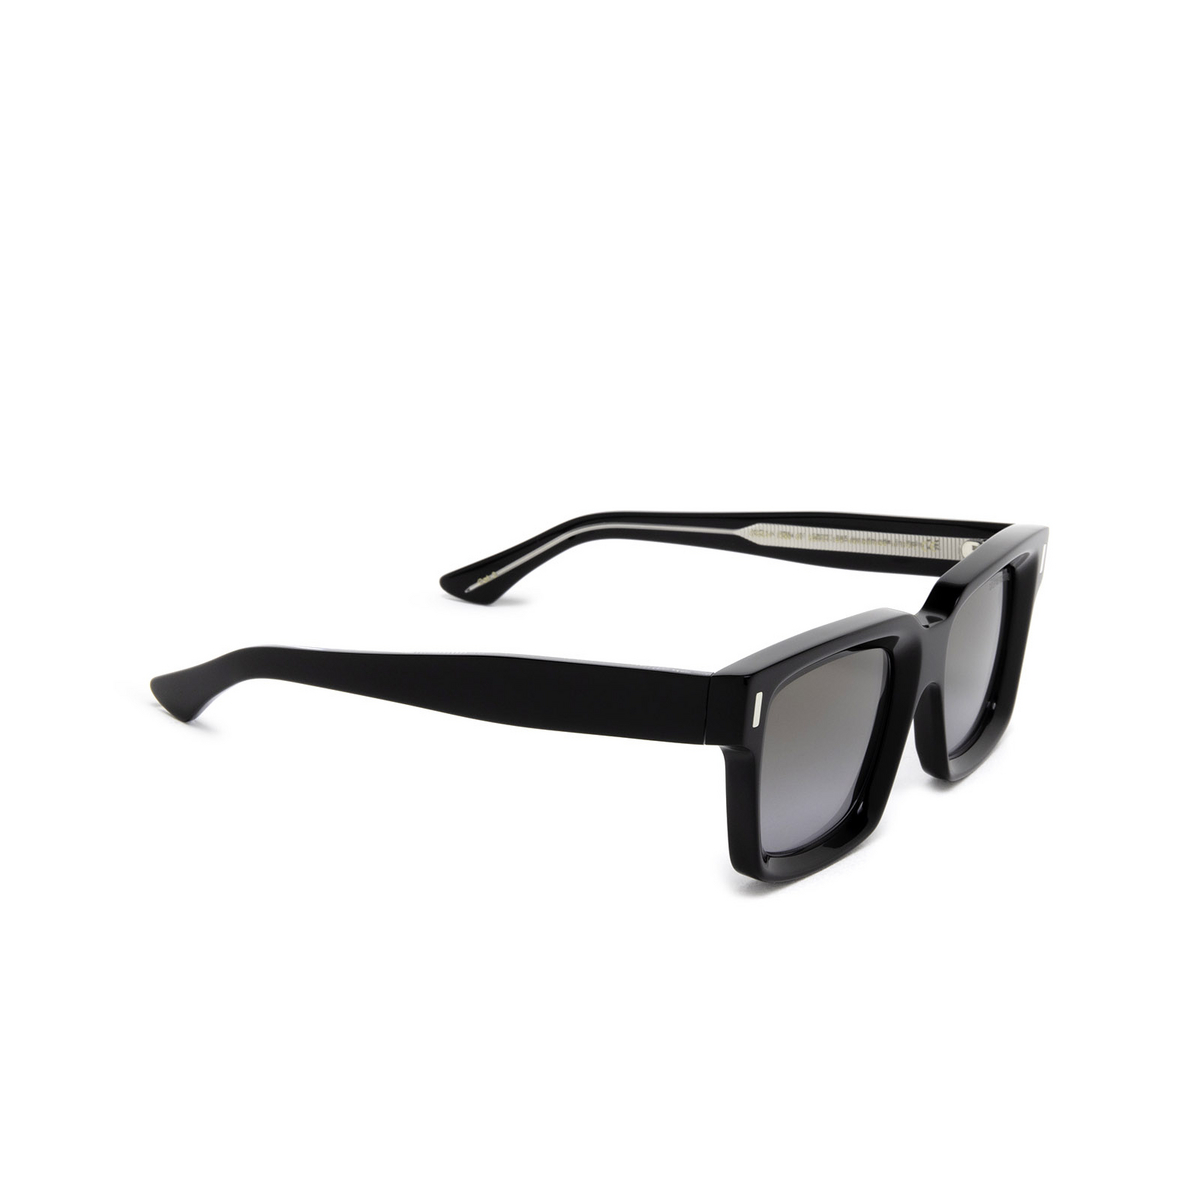 Cutler and Gross 1386 Sunglasses 01 Black - three-quarters view